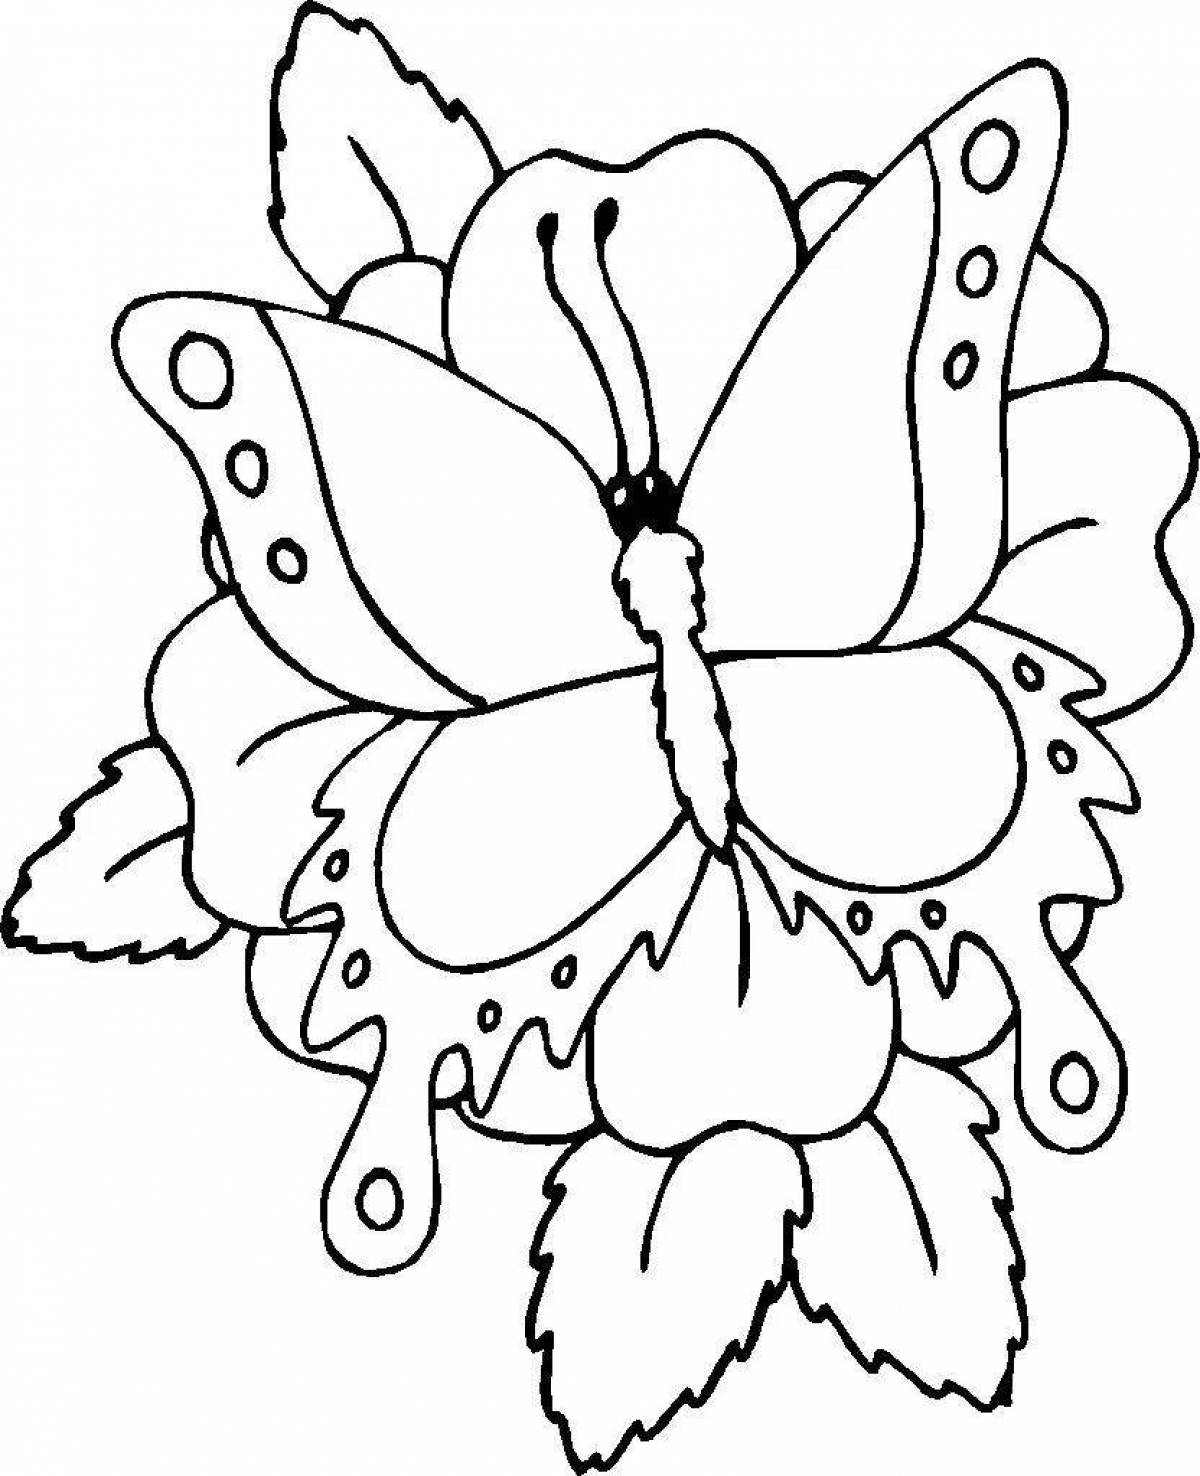 Color-frenzy butterfly coloring page by numbers